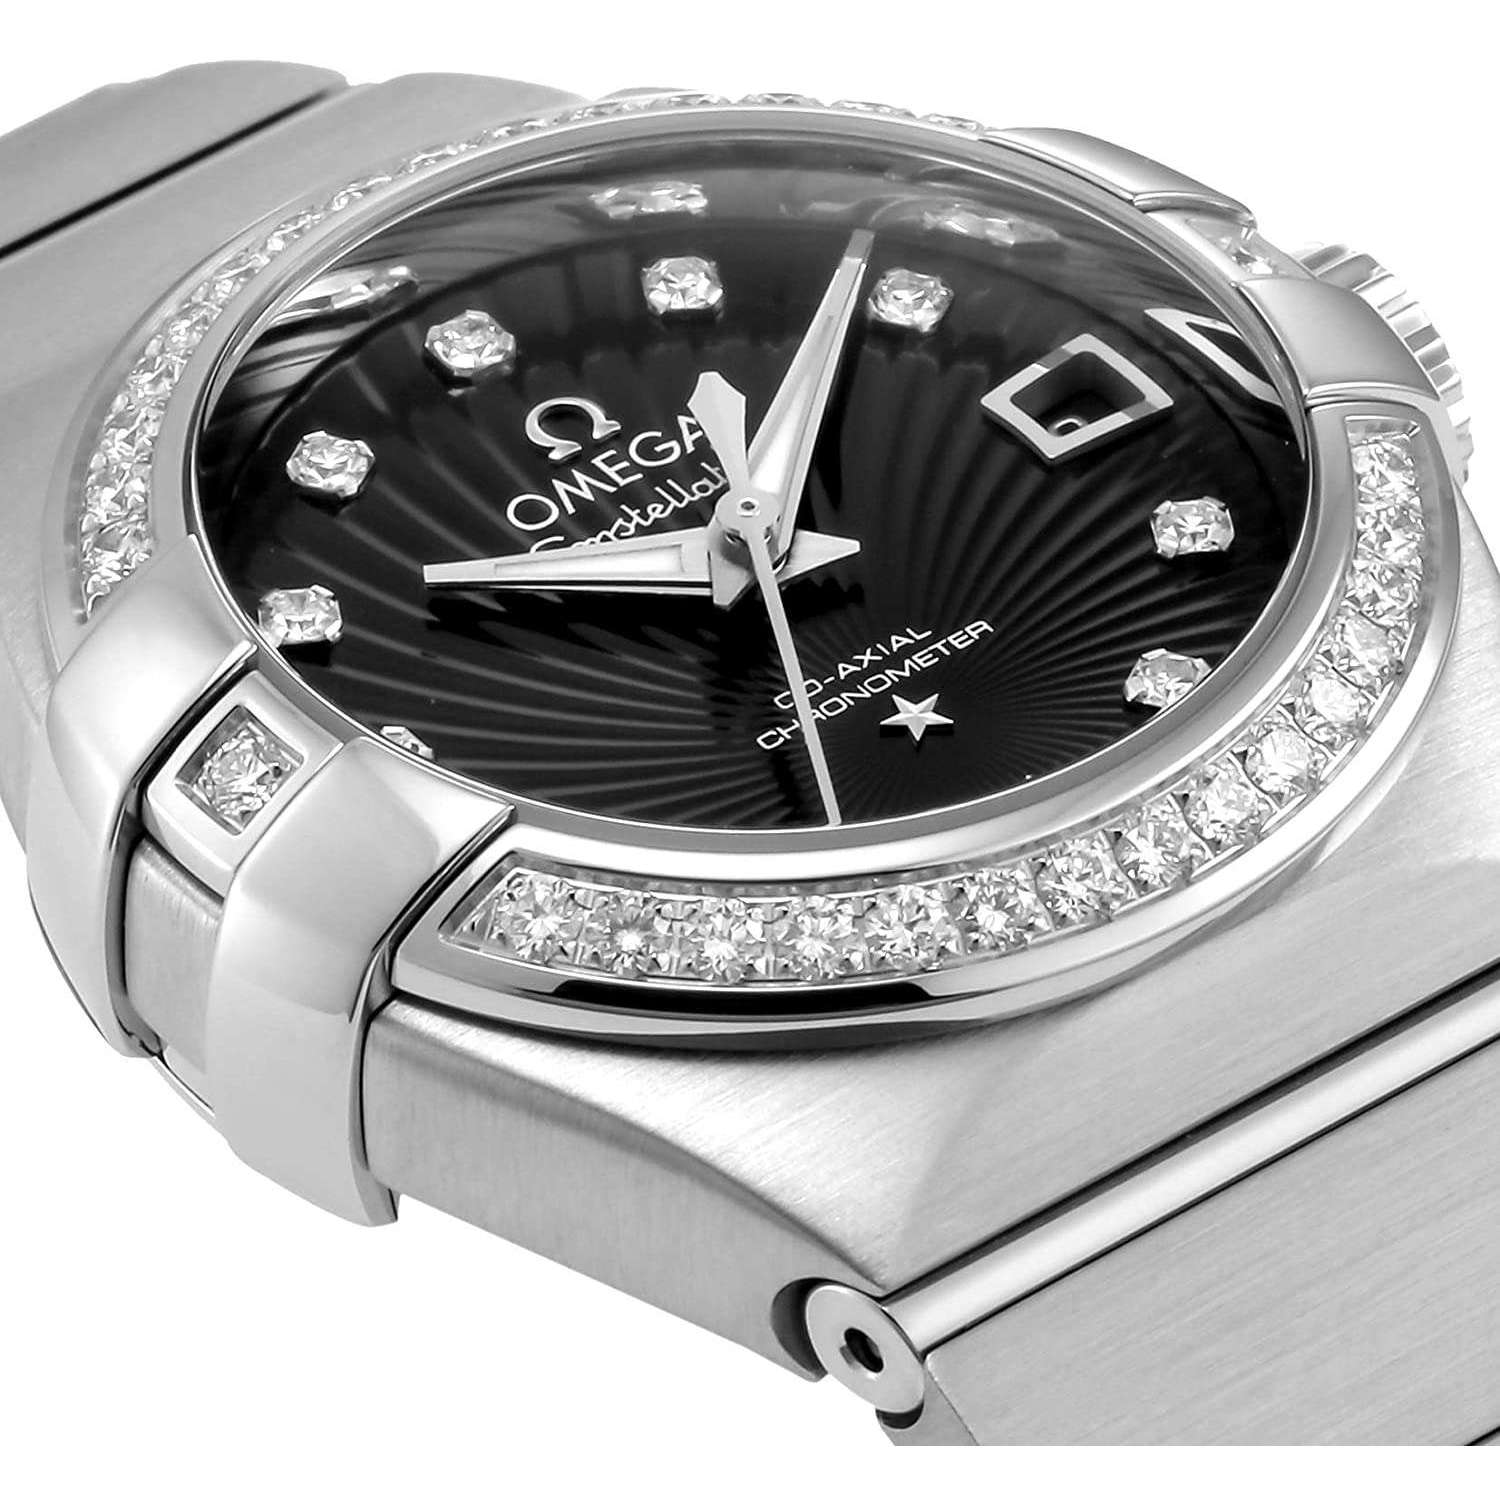 OMEGA CONSTELLATION CO‑AXIAL CHRONOMETER 27 MM WOMEN WATCH 123.15.27.20.51.001 - ROOK JAPAN